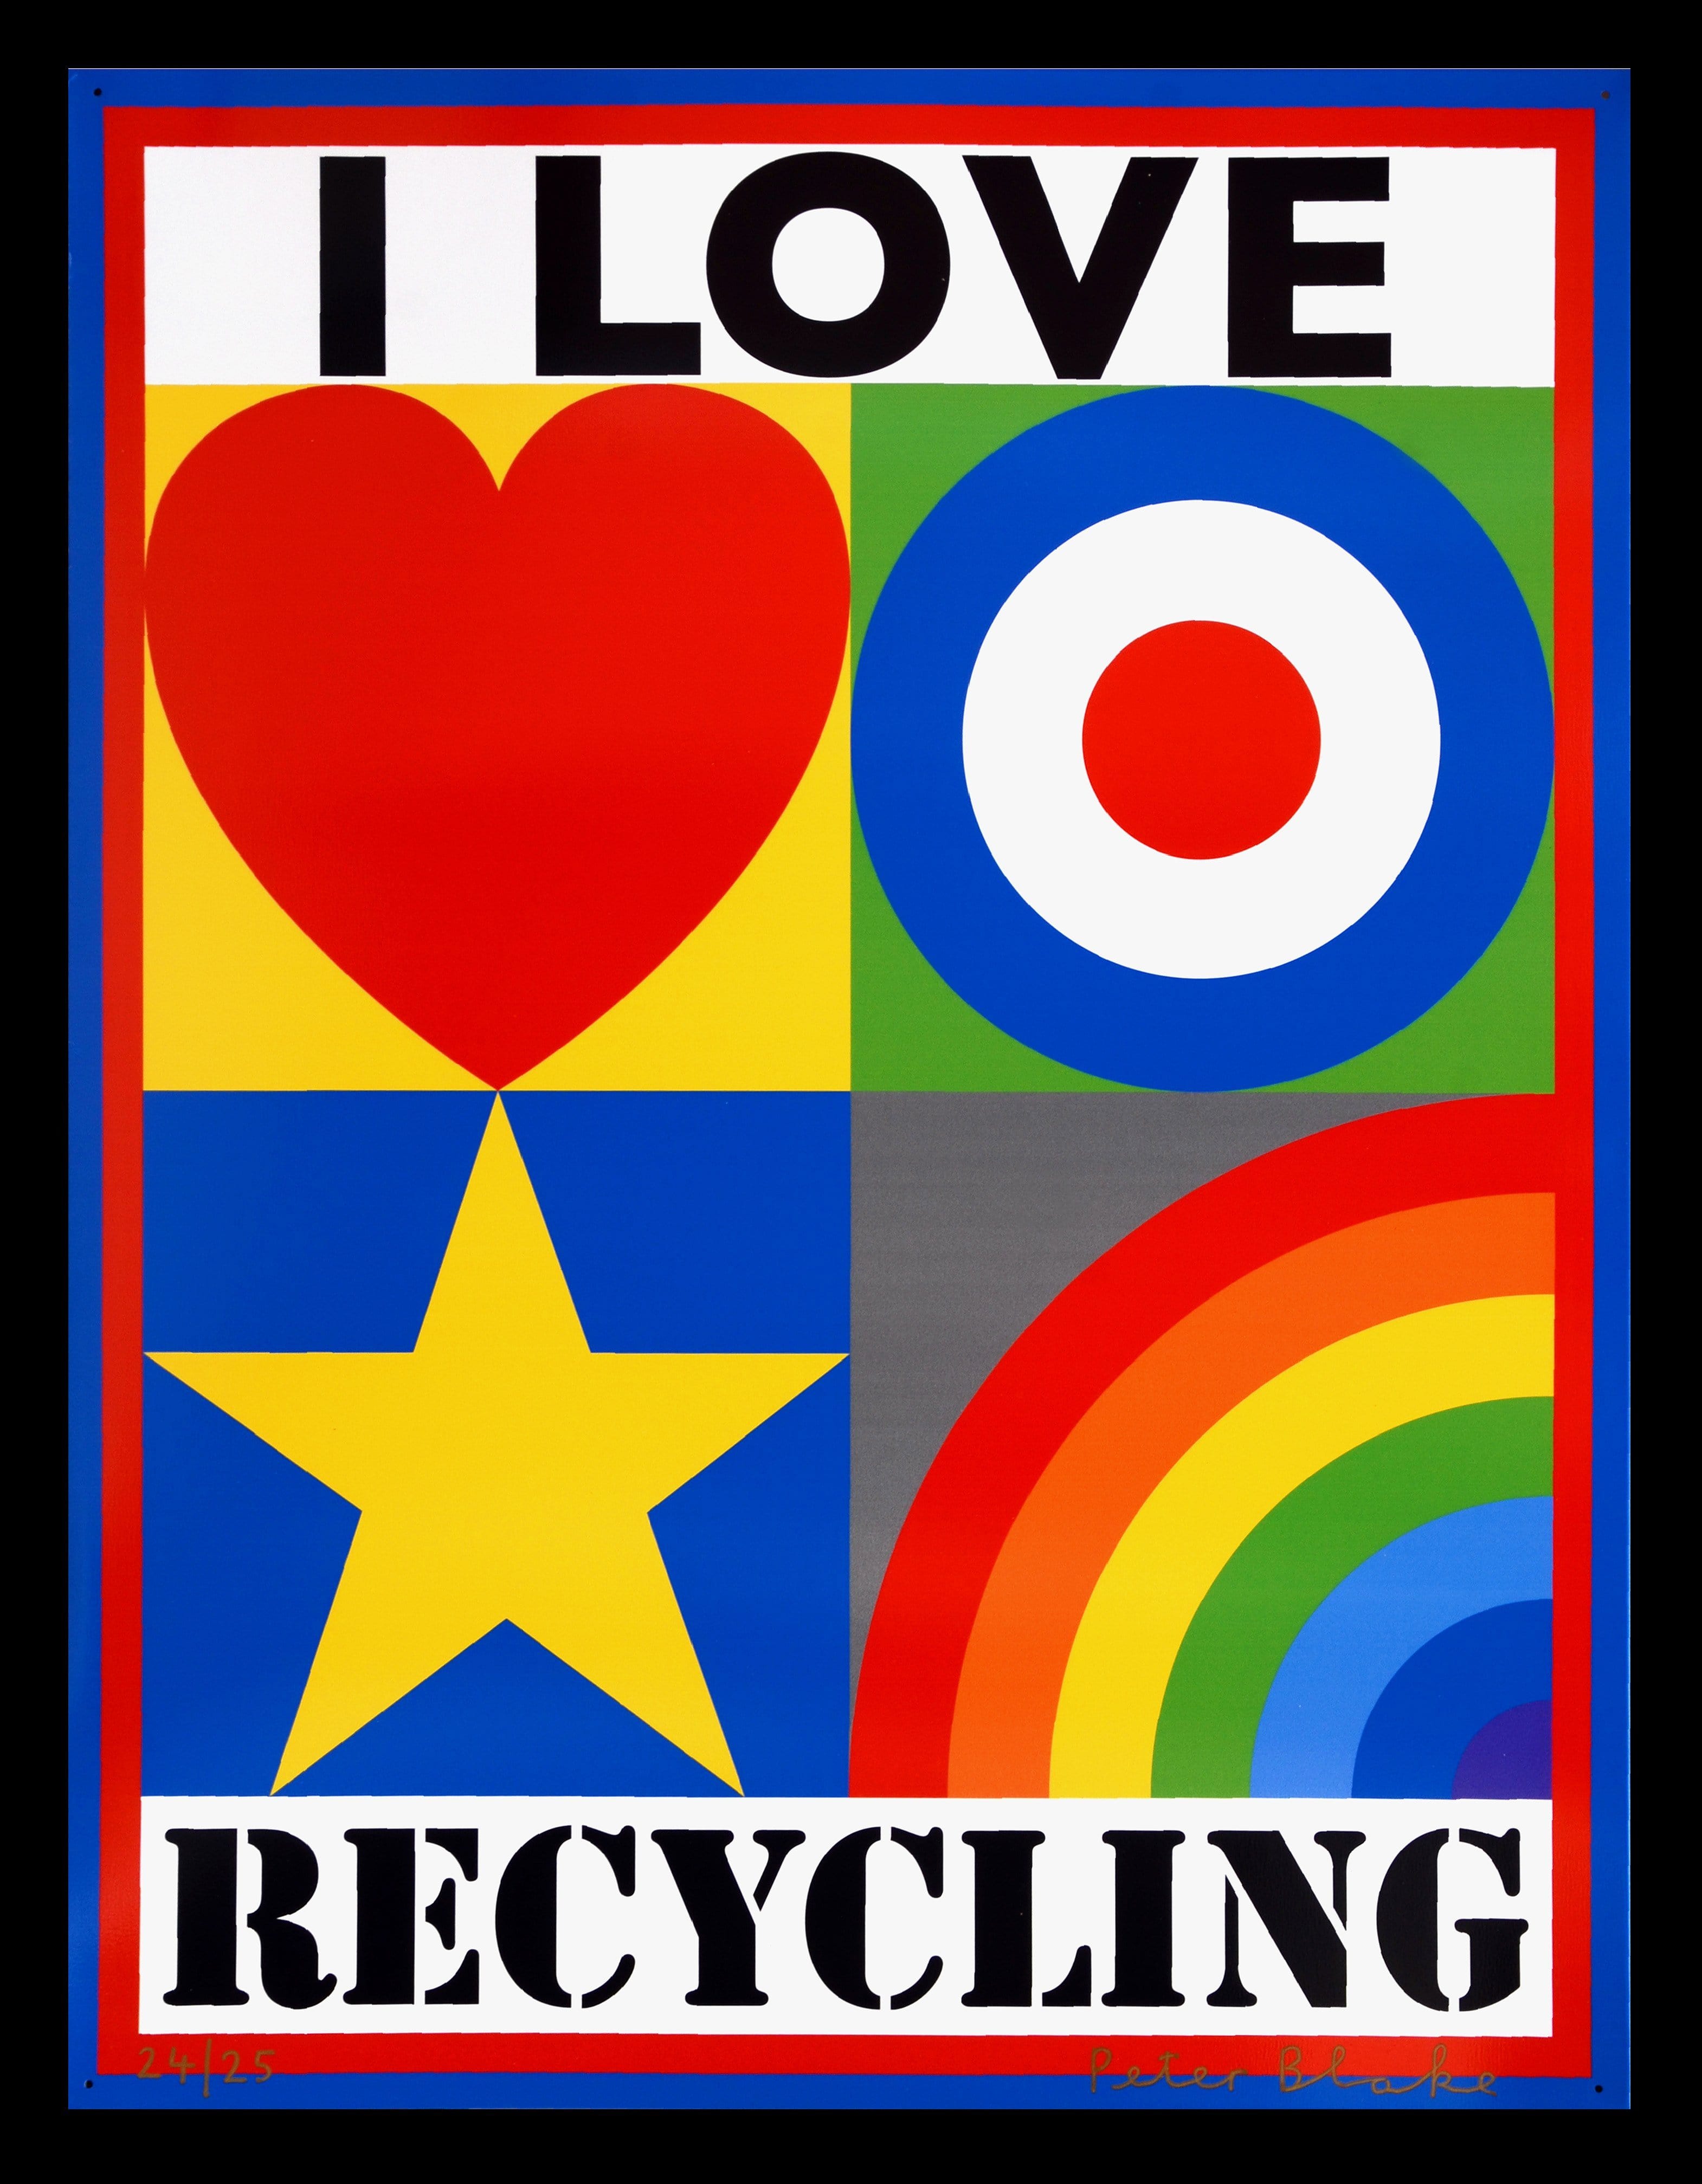 I Love Recycling, 2010 Enlarged